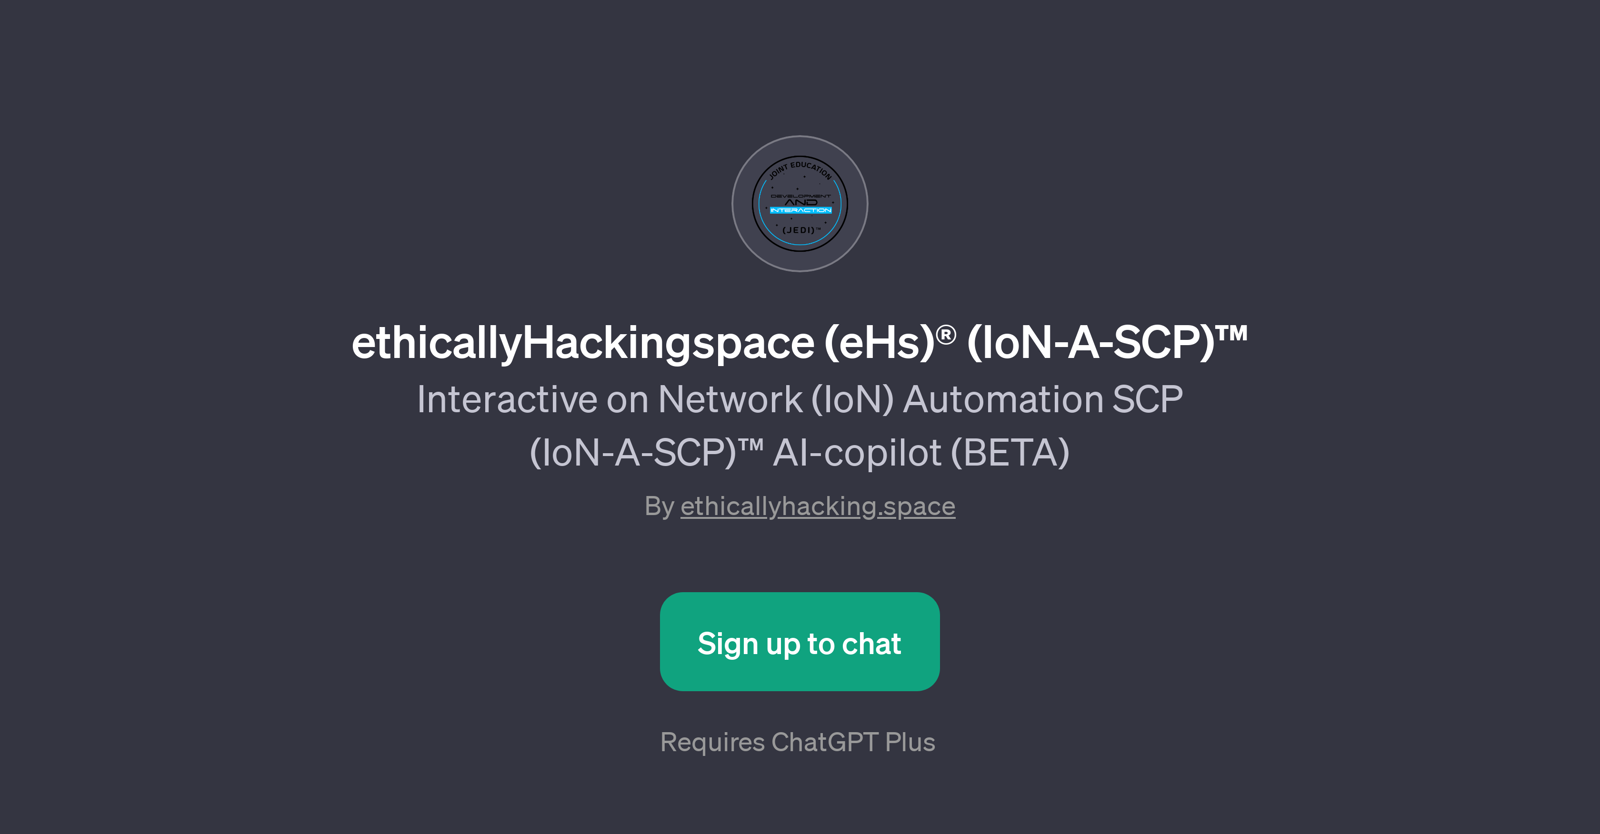 ethicallyHackingspace (eHs) (IoN-A-SCP) website